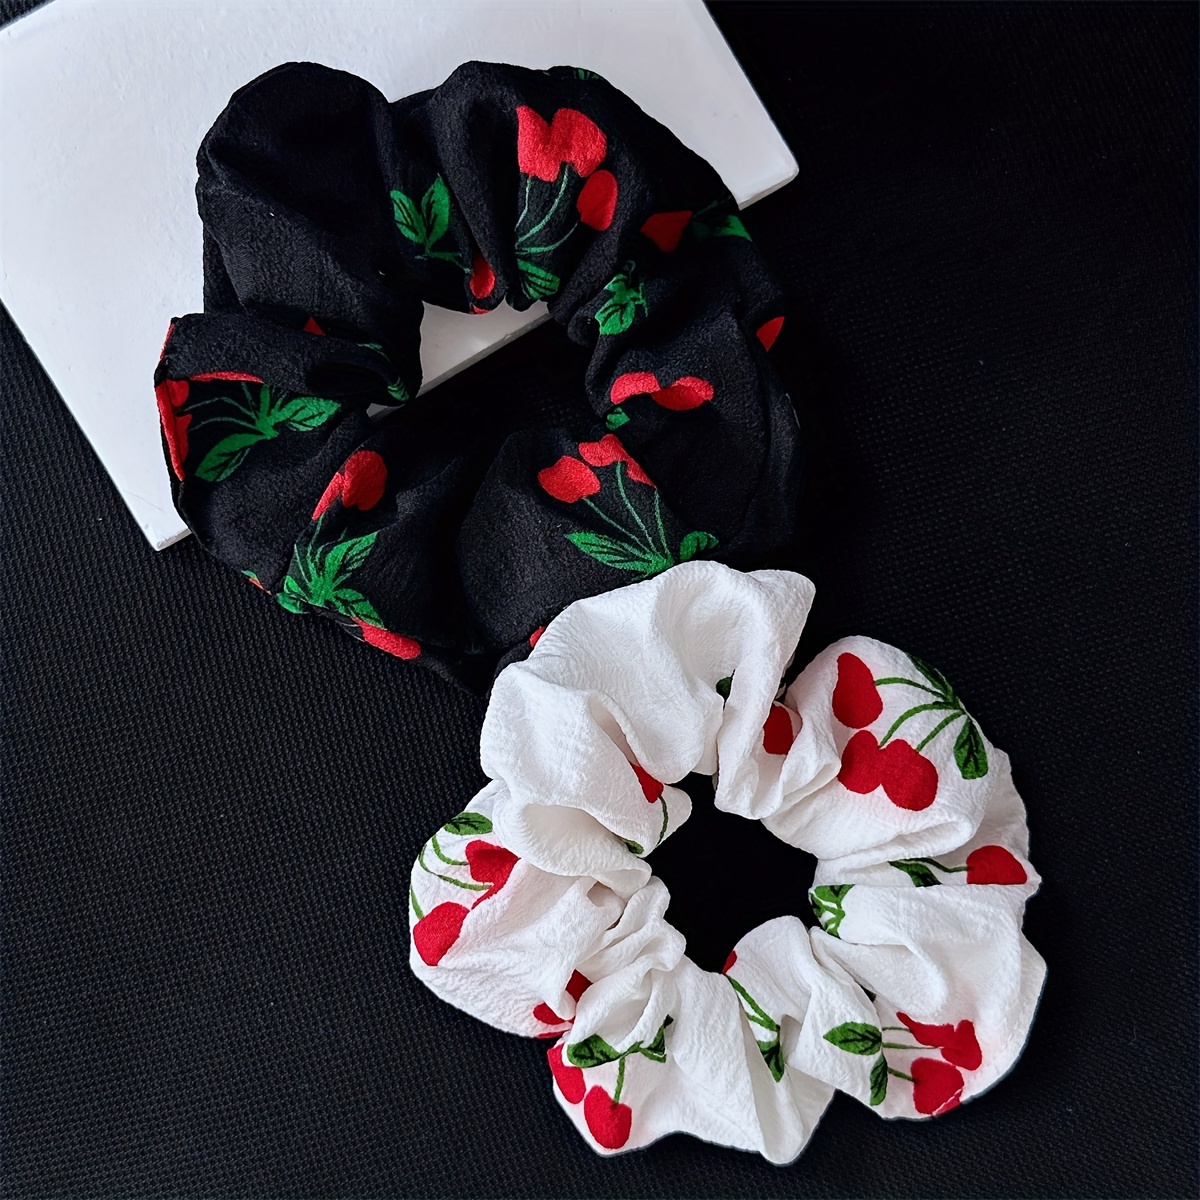 

2-piece Set Elegant Cherry Print Fabric Scrunchies - Sweet & Stylish Hair Ties For Women And Girls, Perfect For Ponytails & Updos